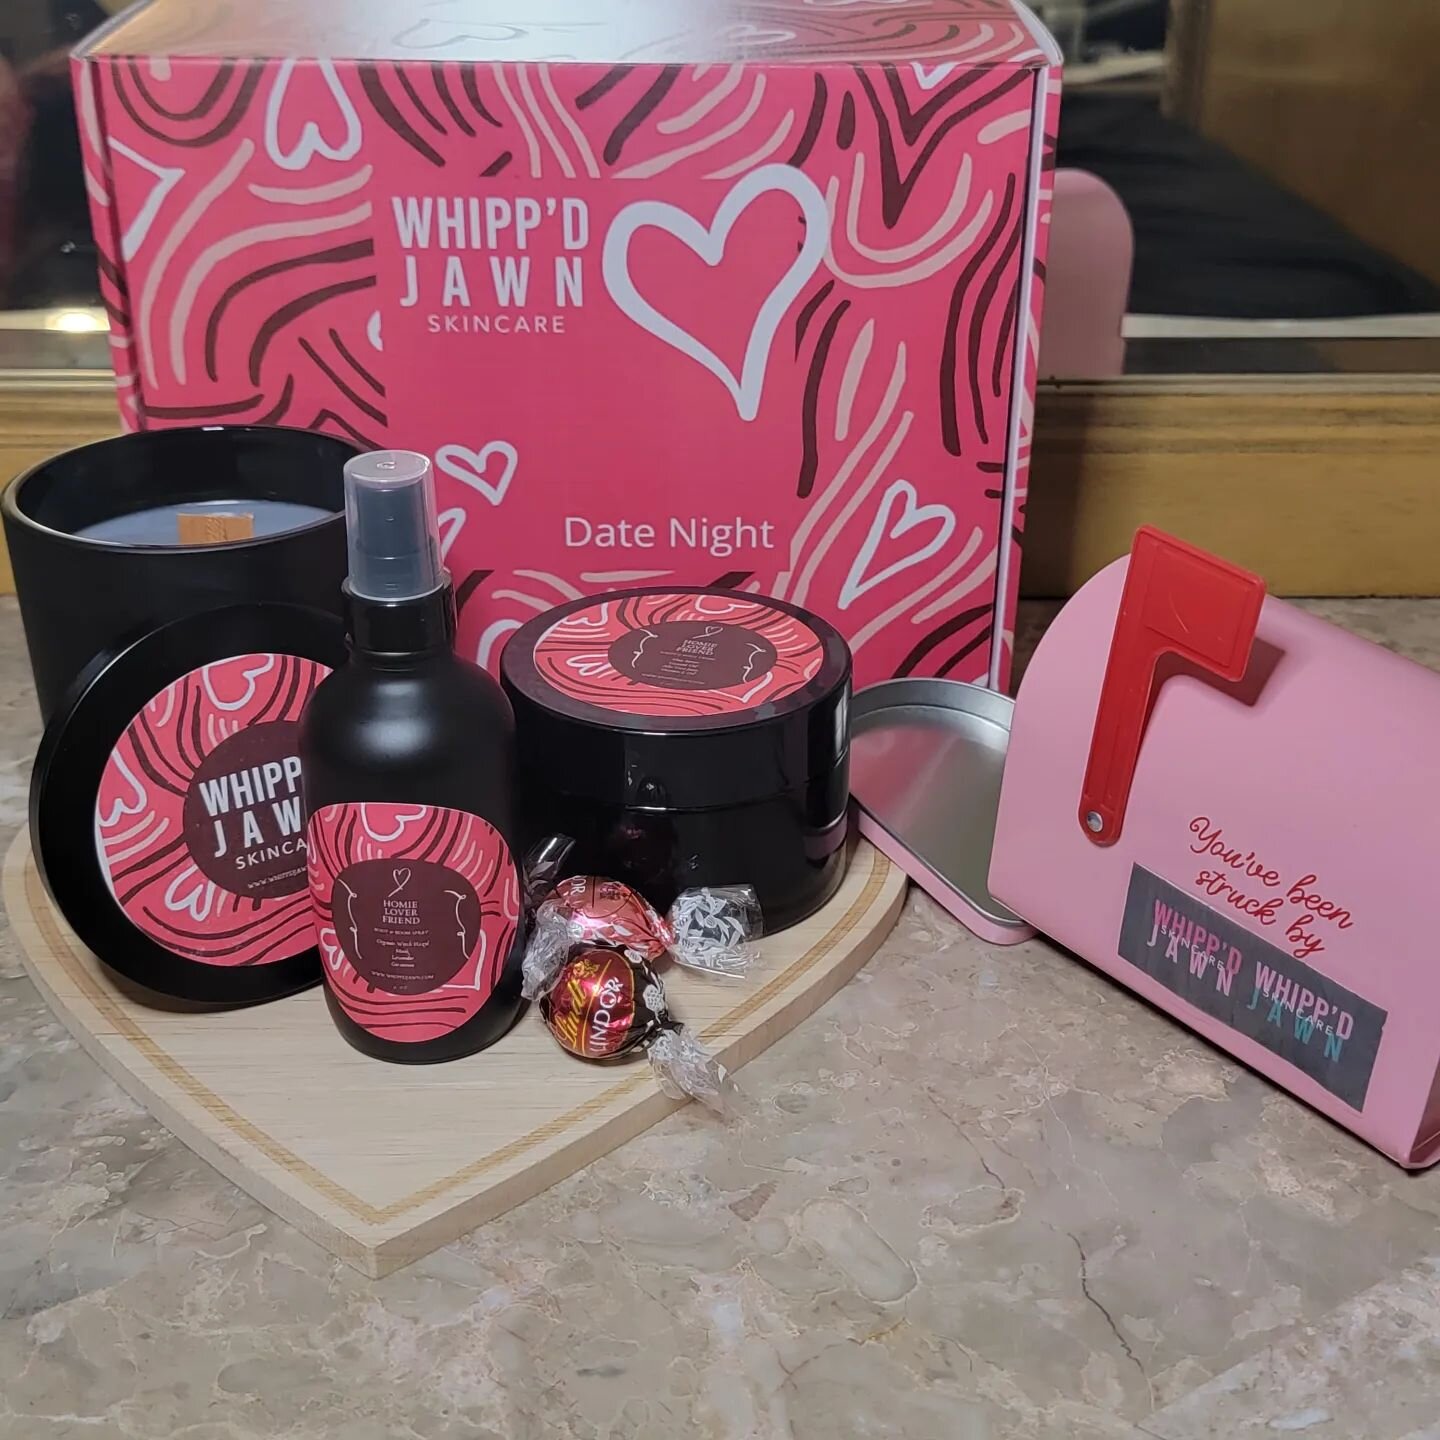 You've been Struck by Whipp'd Jawn

We love love here, so we wanted to curate a box that exhibits that whether you are making it a part of your self-love care routine or experience with your partner. This Gift Box is sure to excite your senses and pr